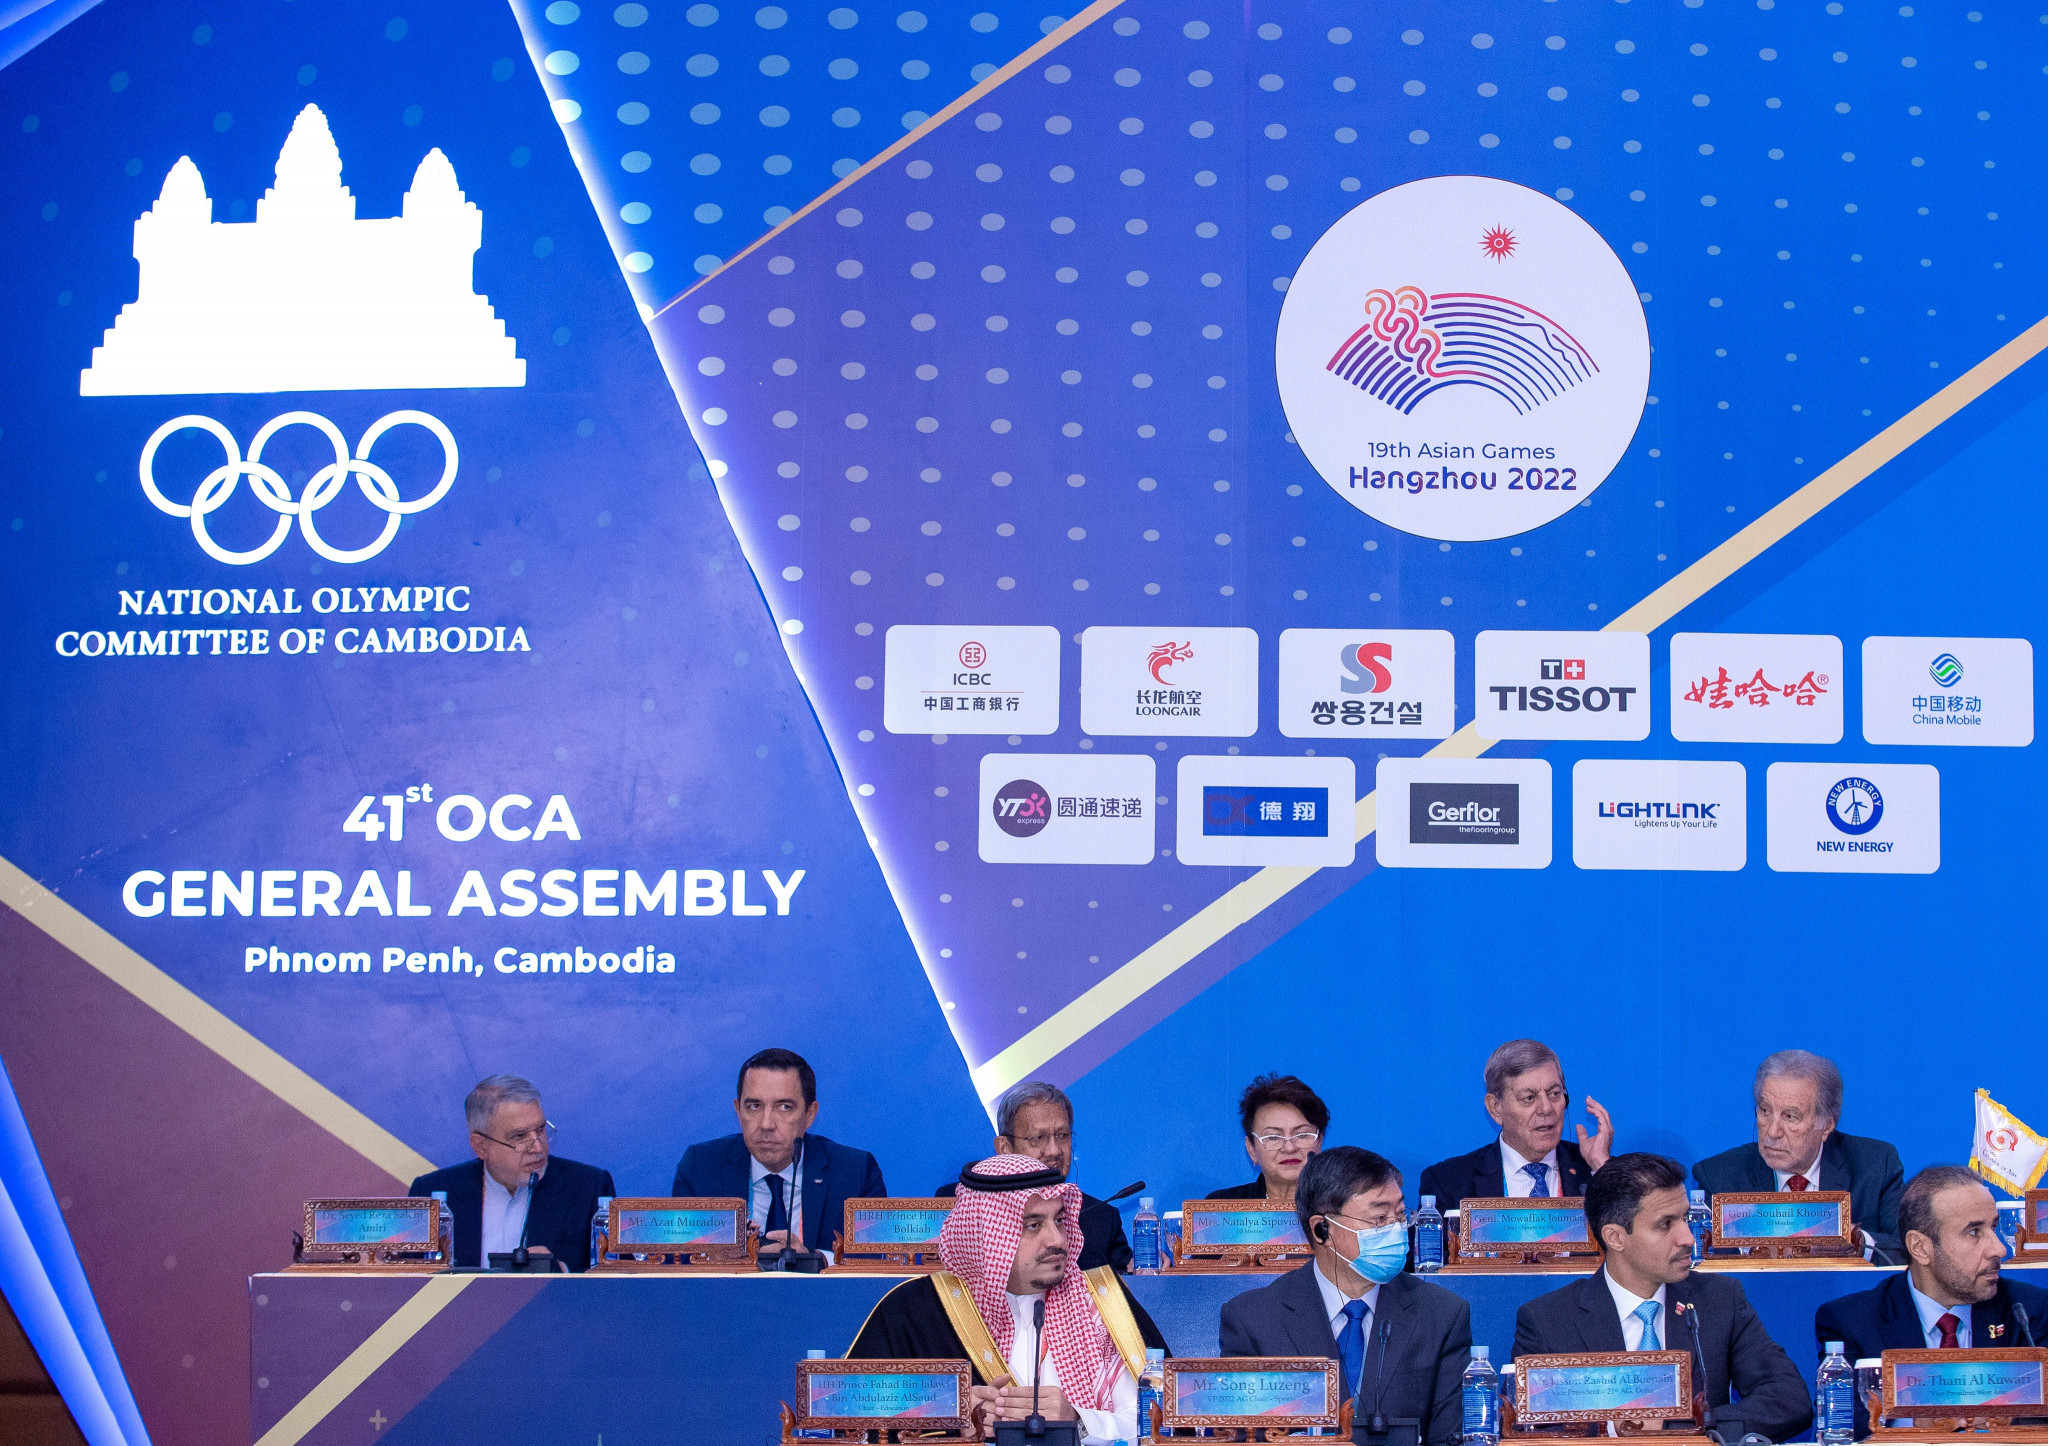 Cambodia's Prime Minister Sun Hen addressed the 41st OCA General Assembly and talked about the power of sport ©Twitter